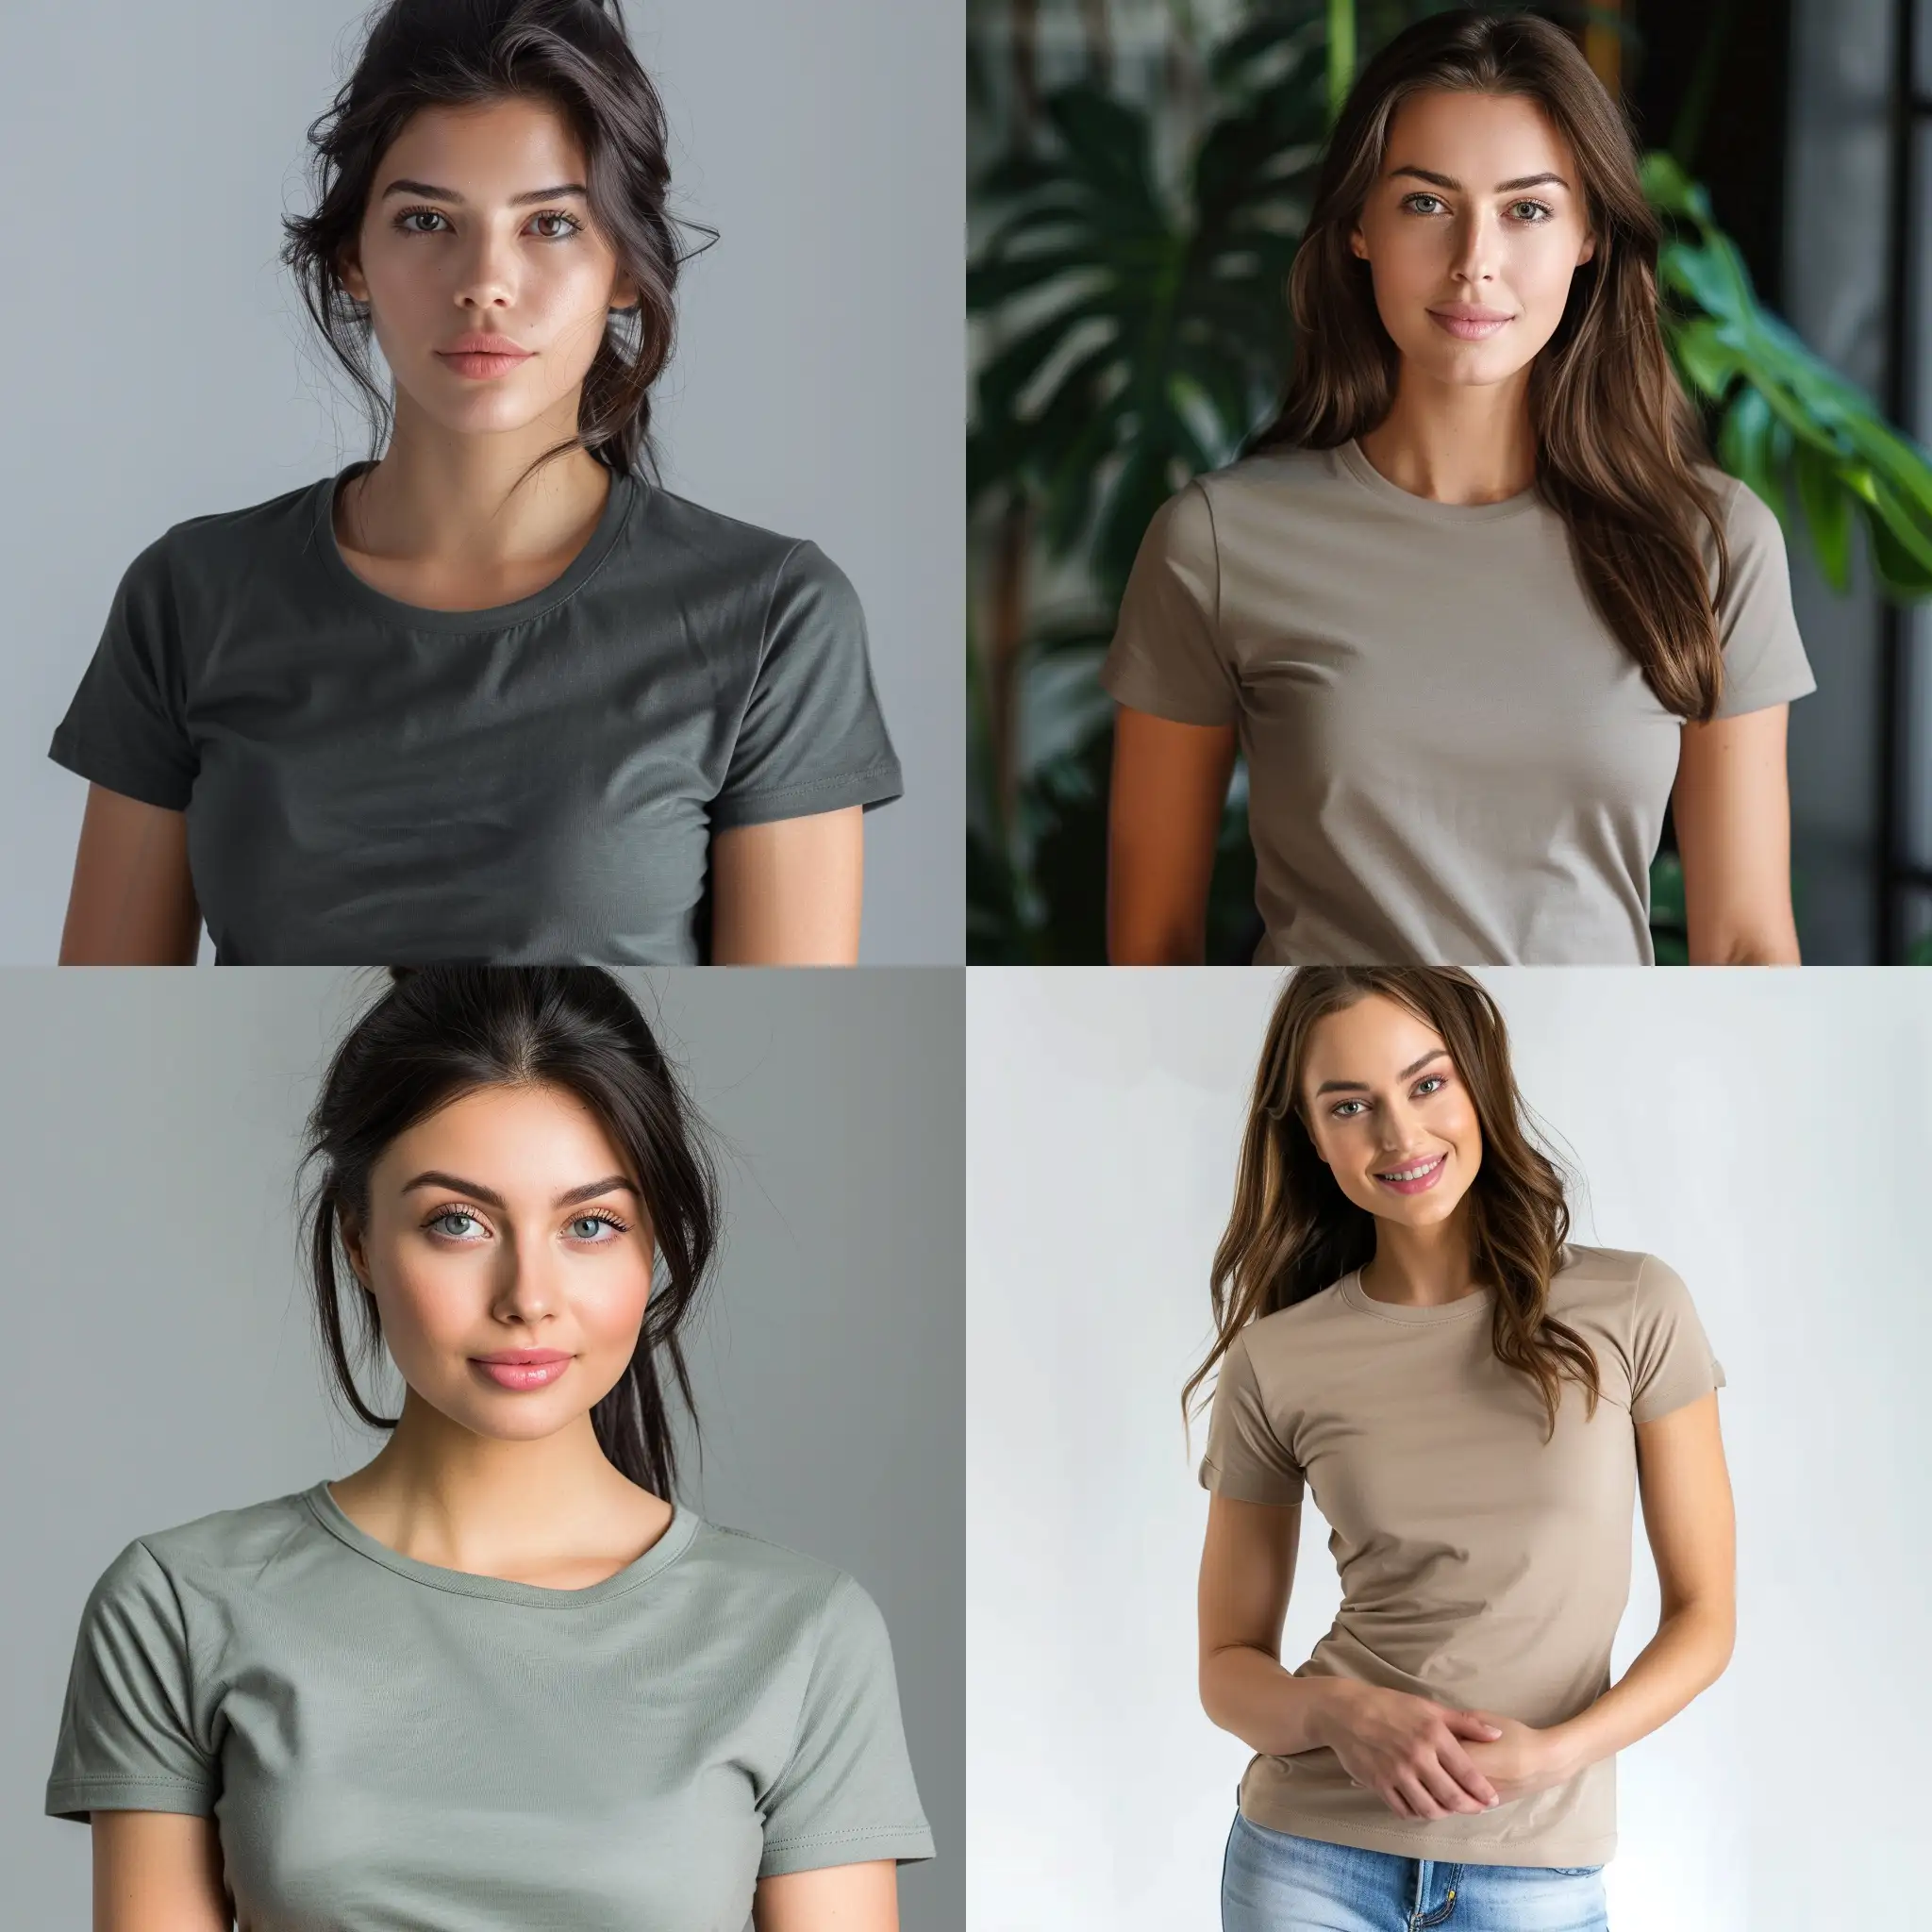 Stylish-Woman-in-Fitted-TShirt-Portrait